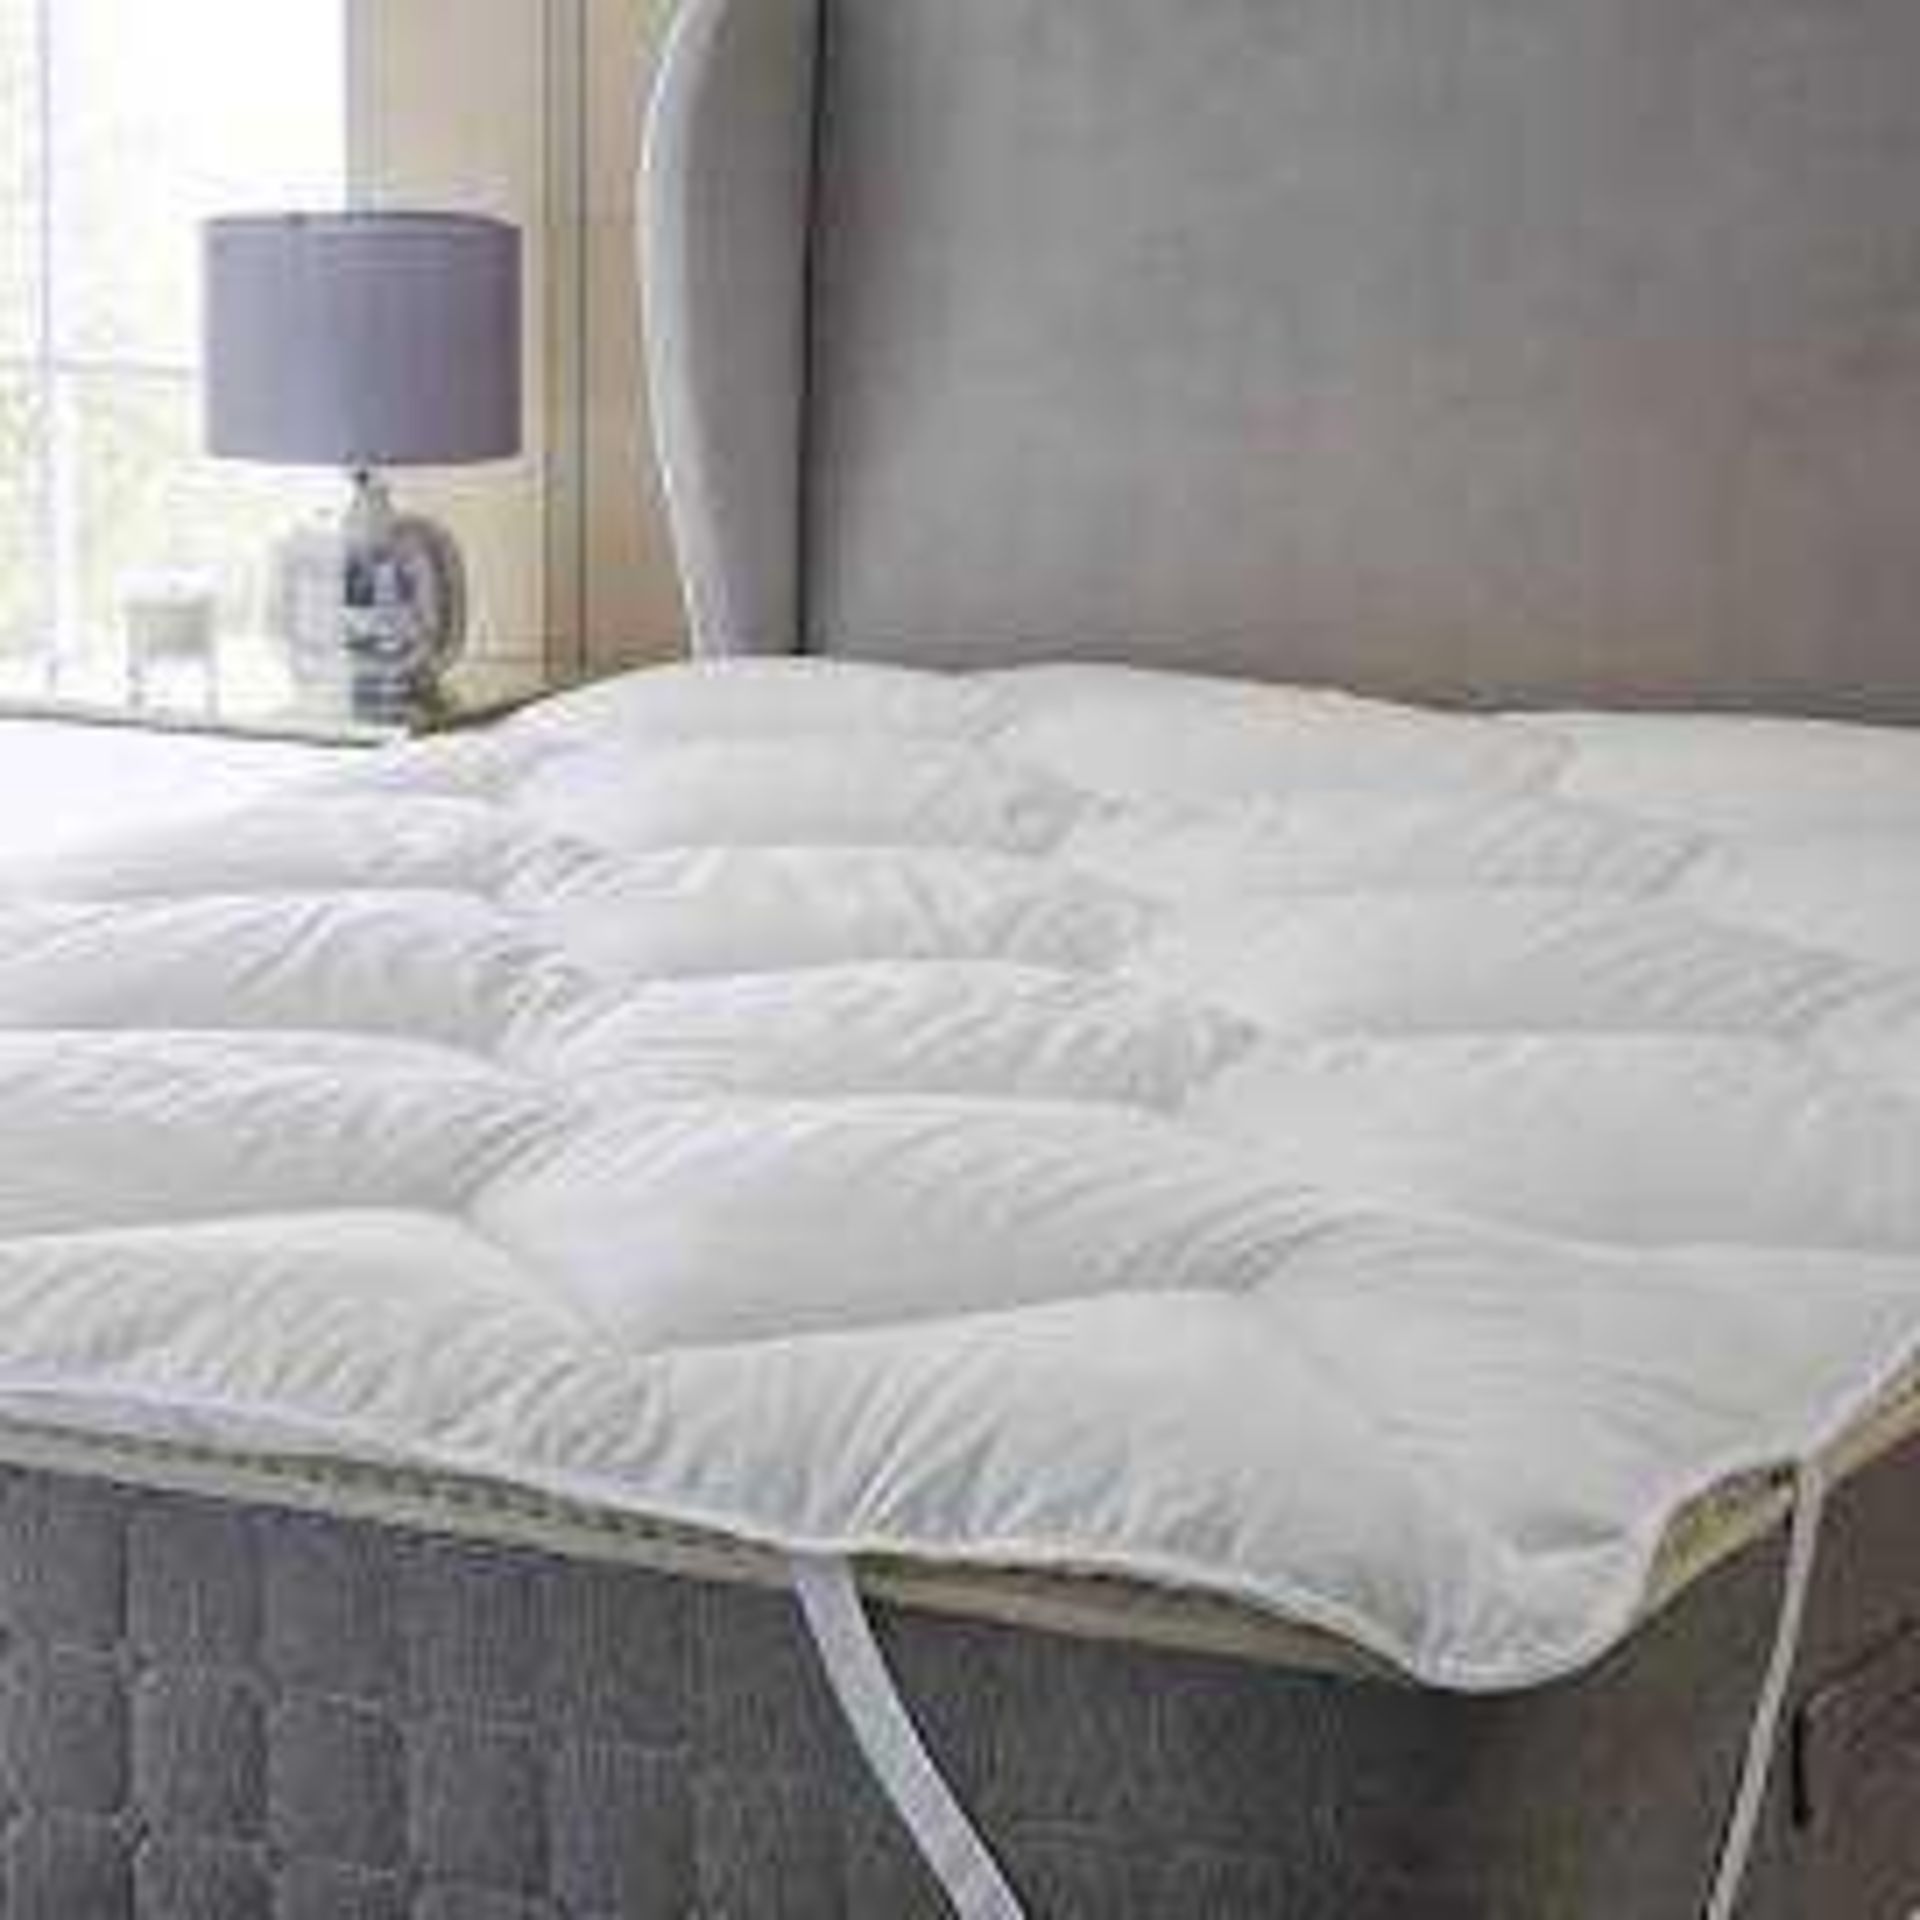 RRP £185 Lot To Contain 2 Bagged John Lewis Soft Touch Washable Mattress Toppers In Sizes Double And